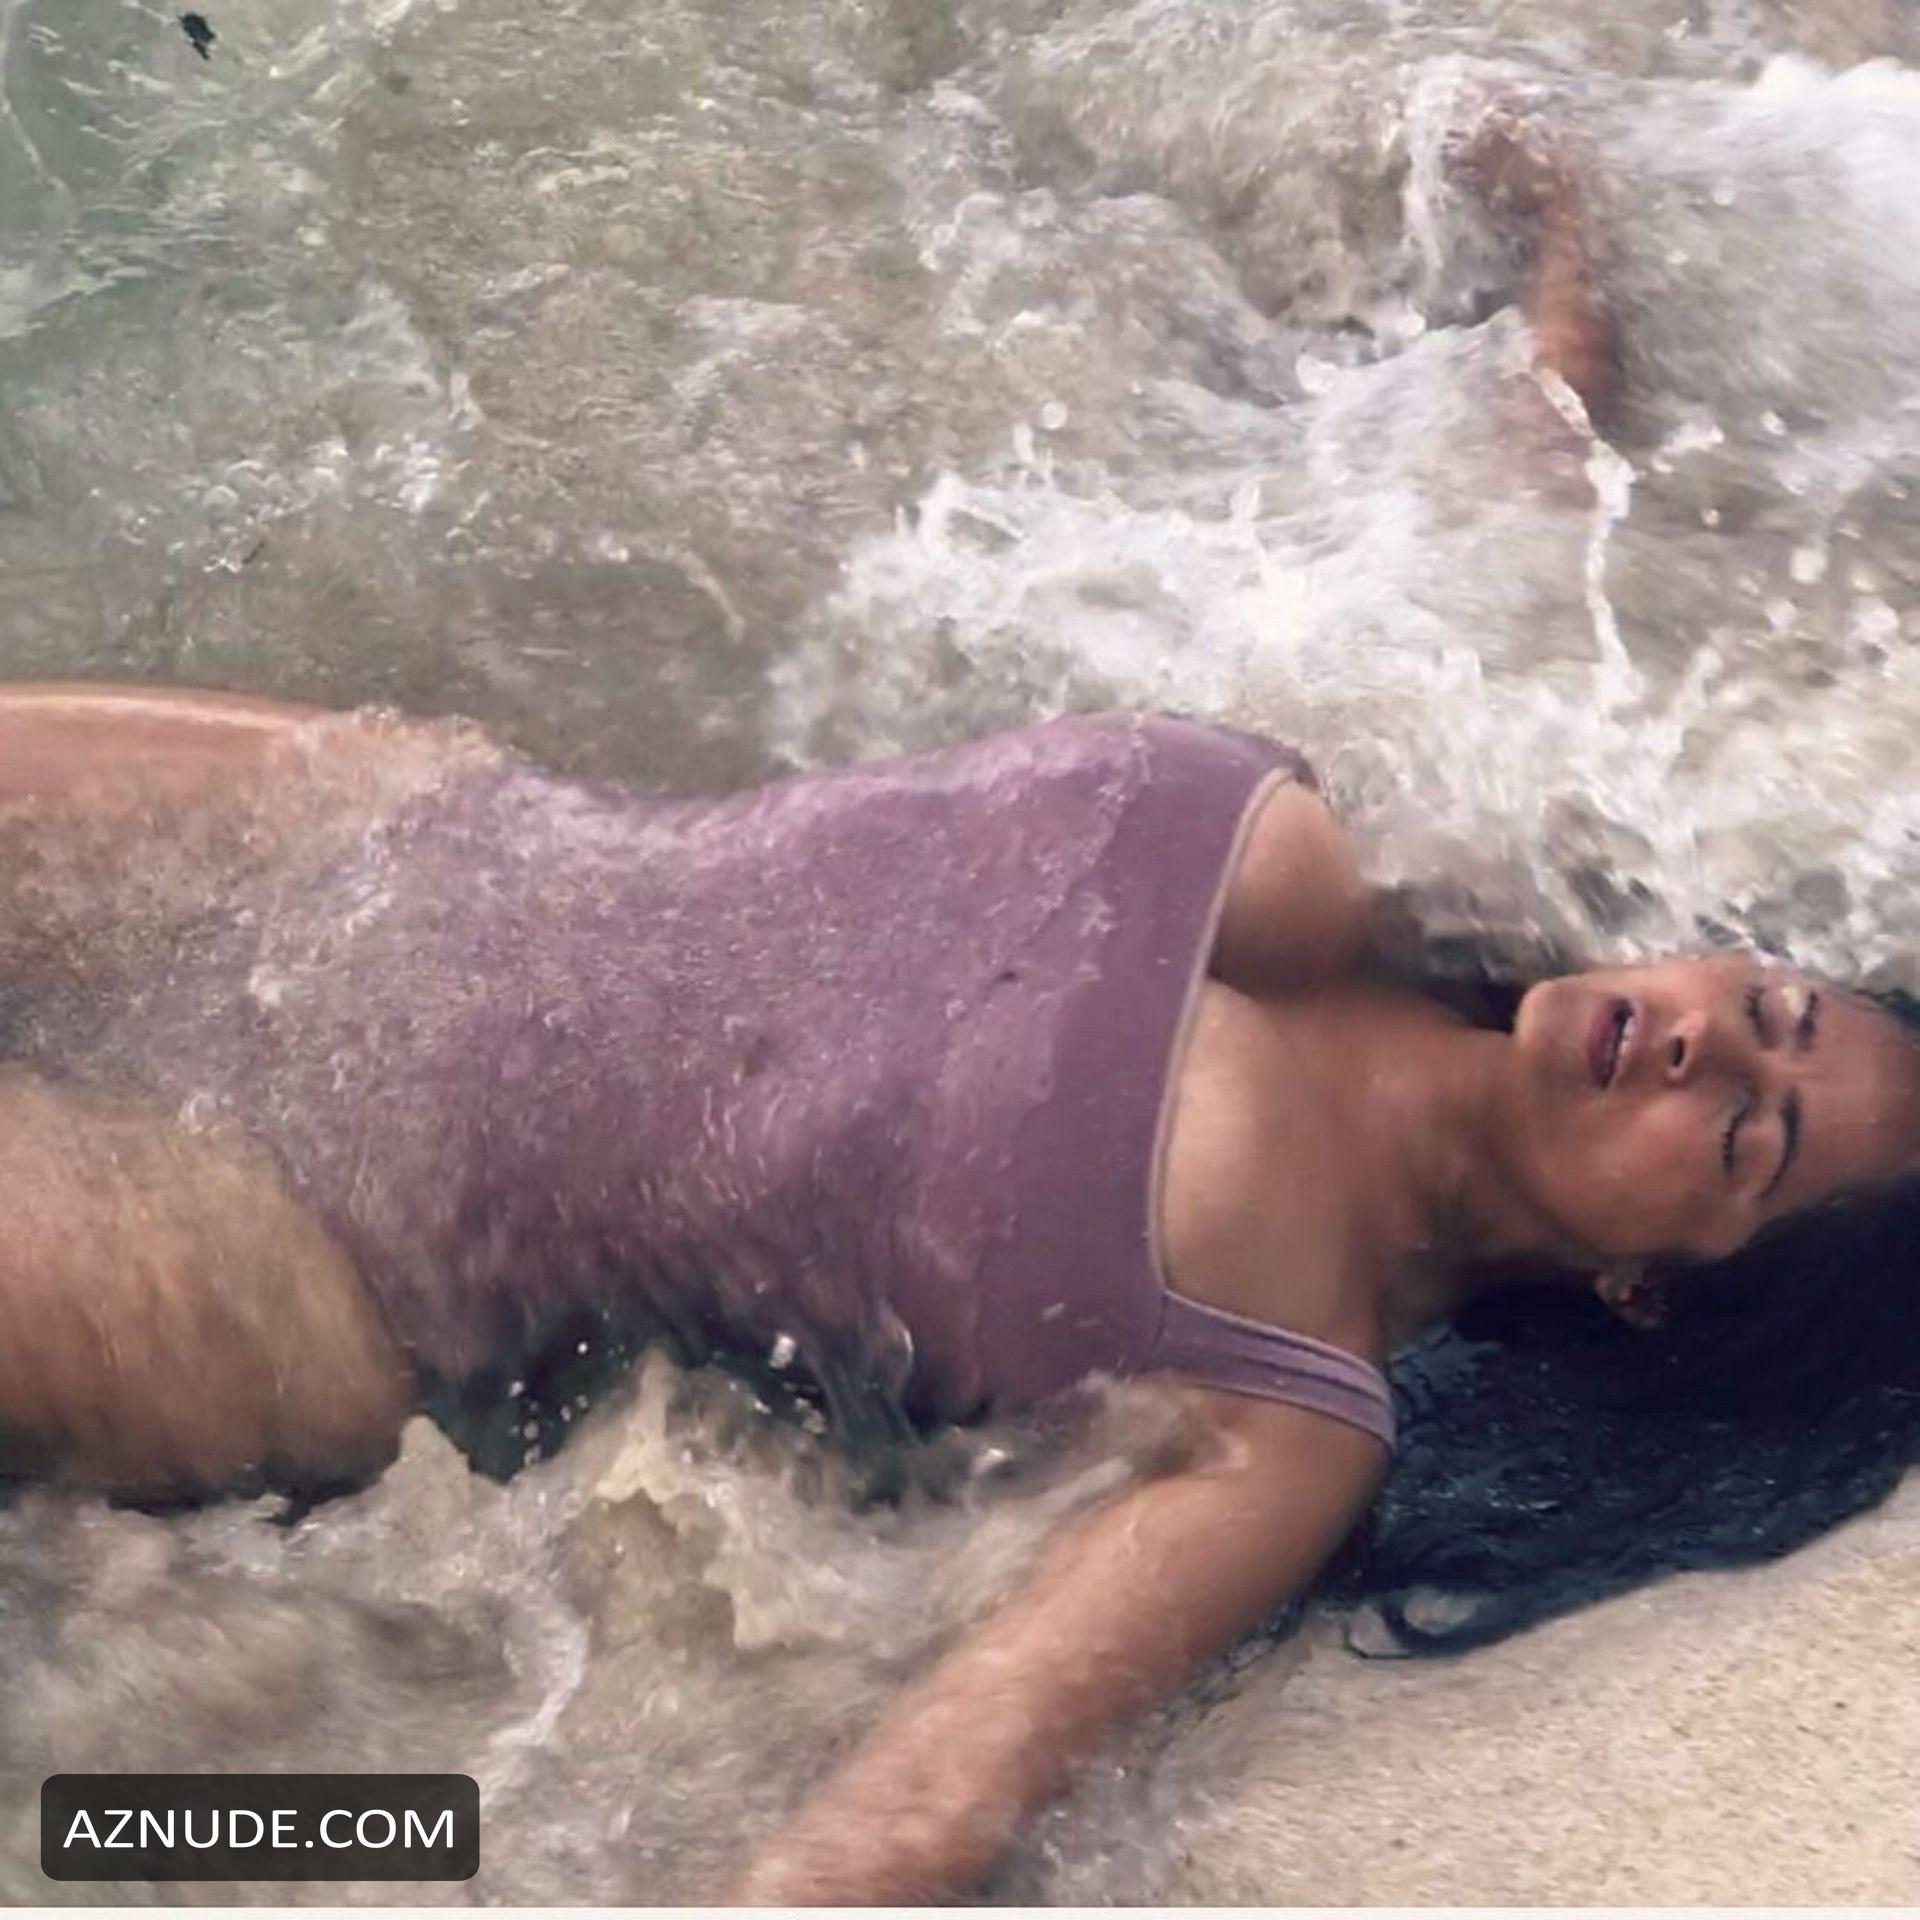 Salma Hayek Puts On A Busty Display As She Almost Drowns